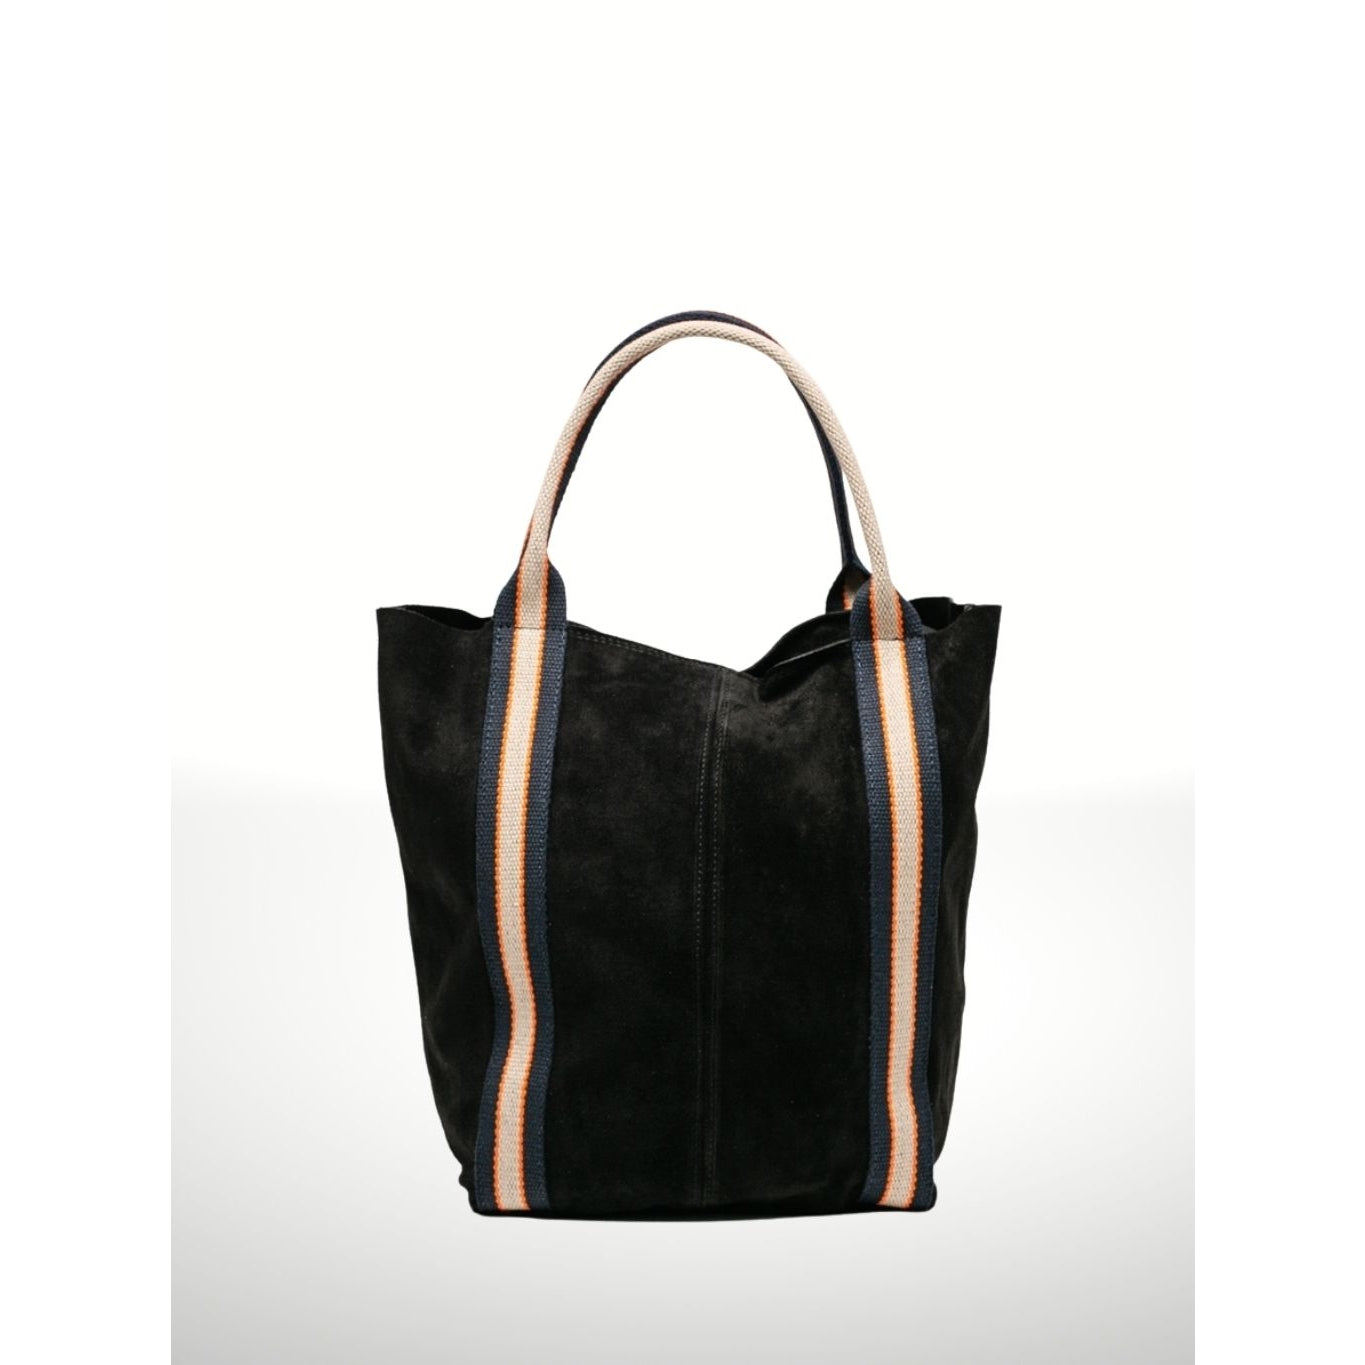 Leather Zipper Tote with Woven Handles